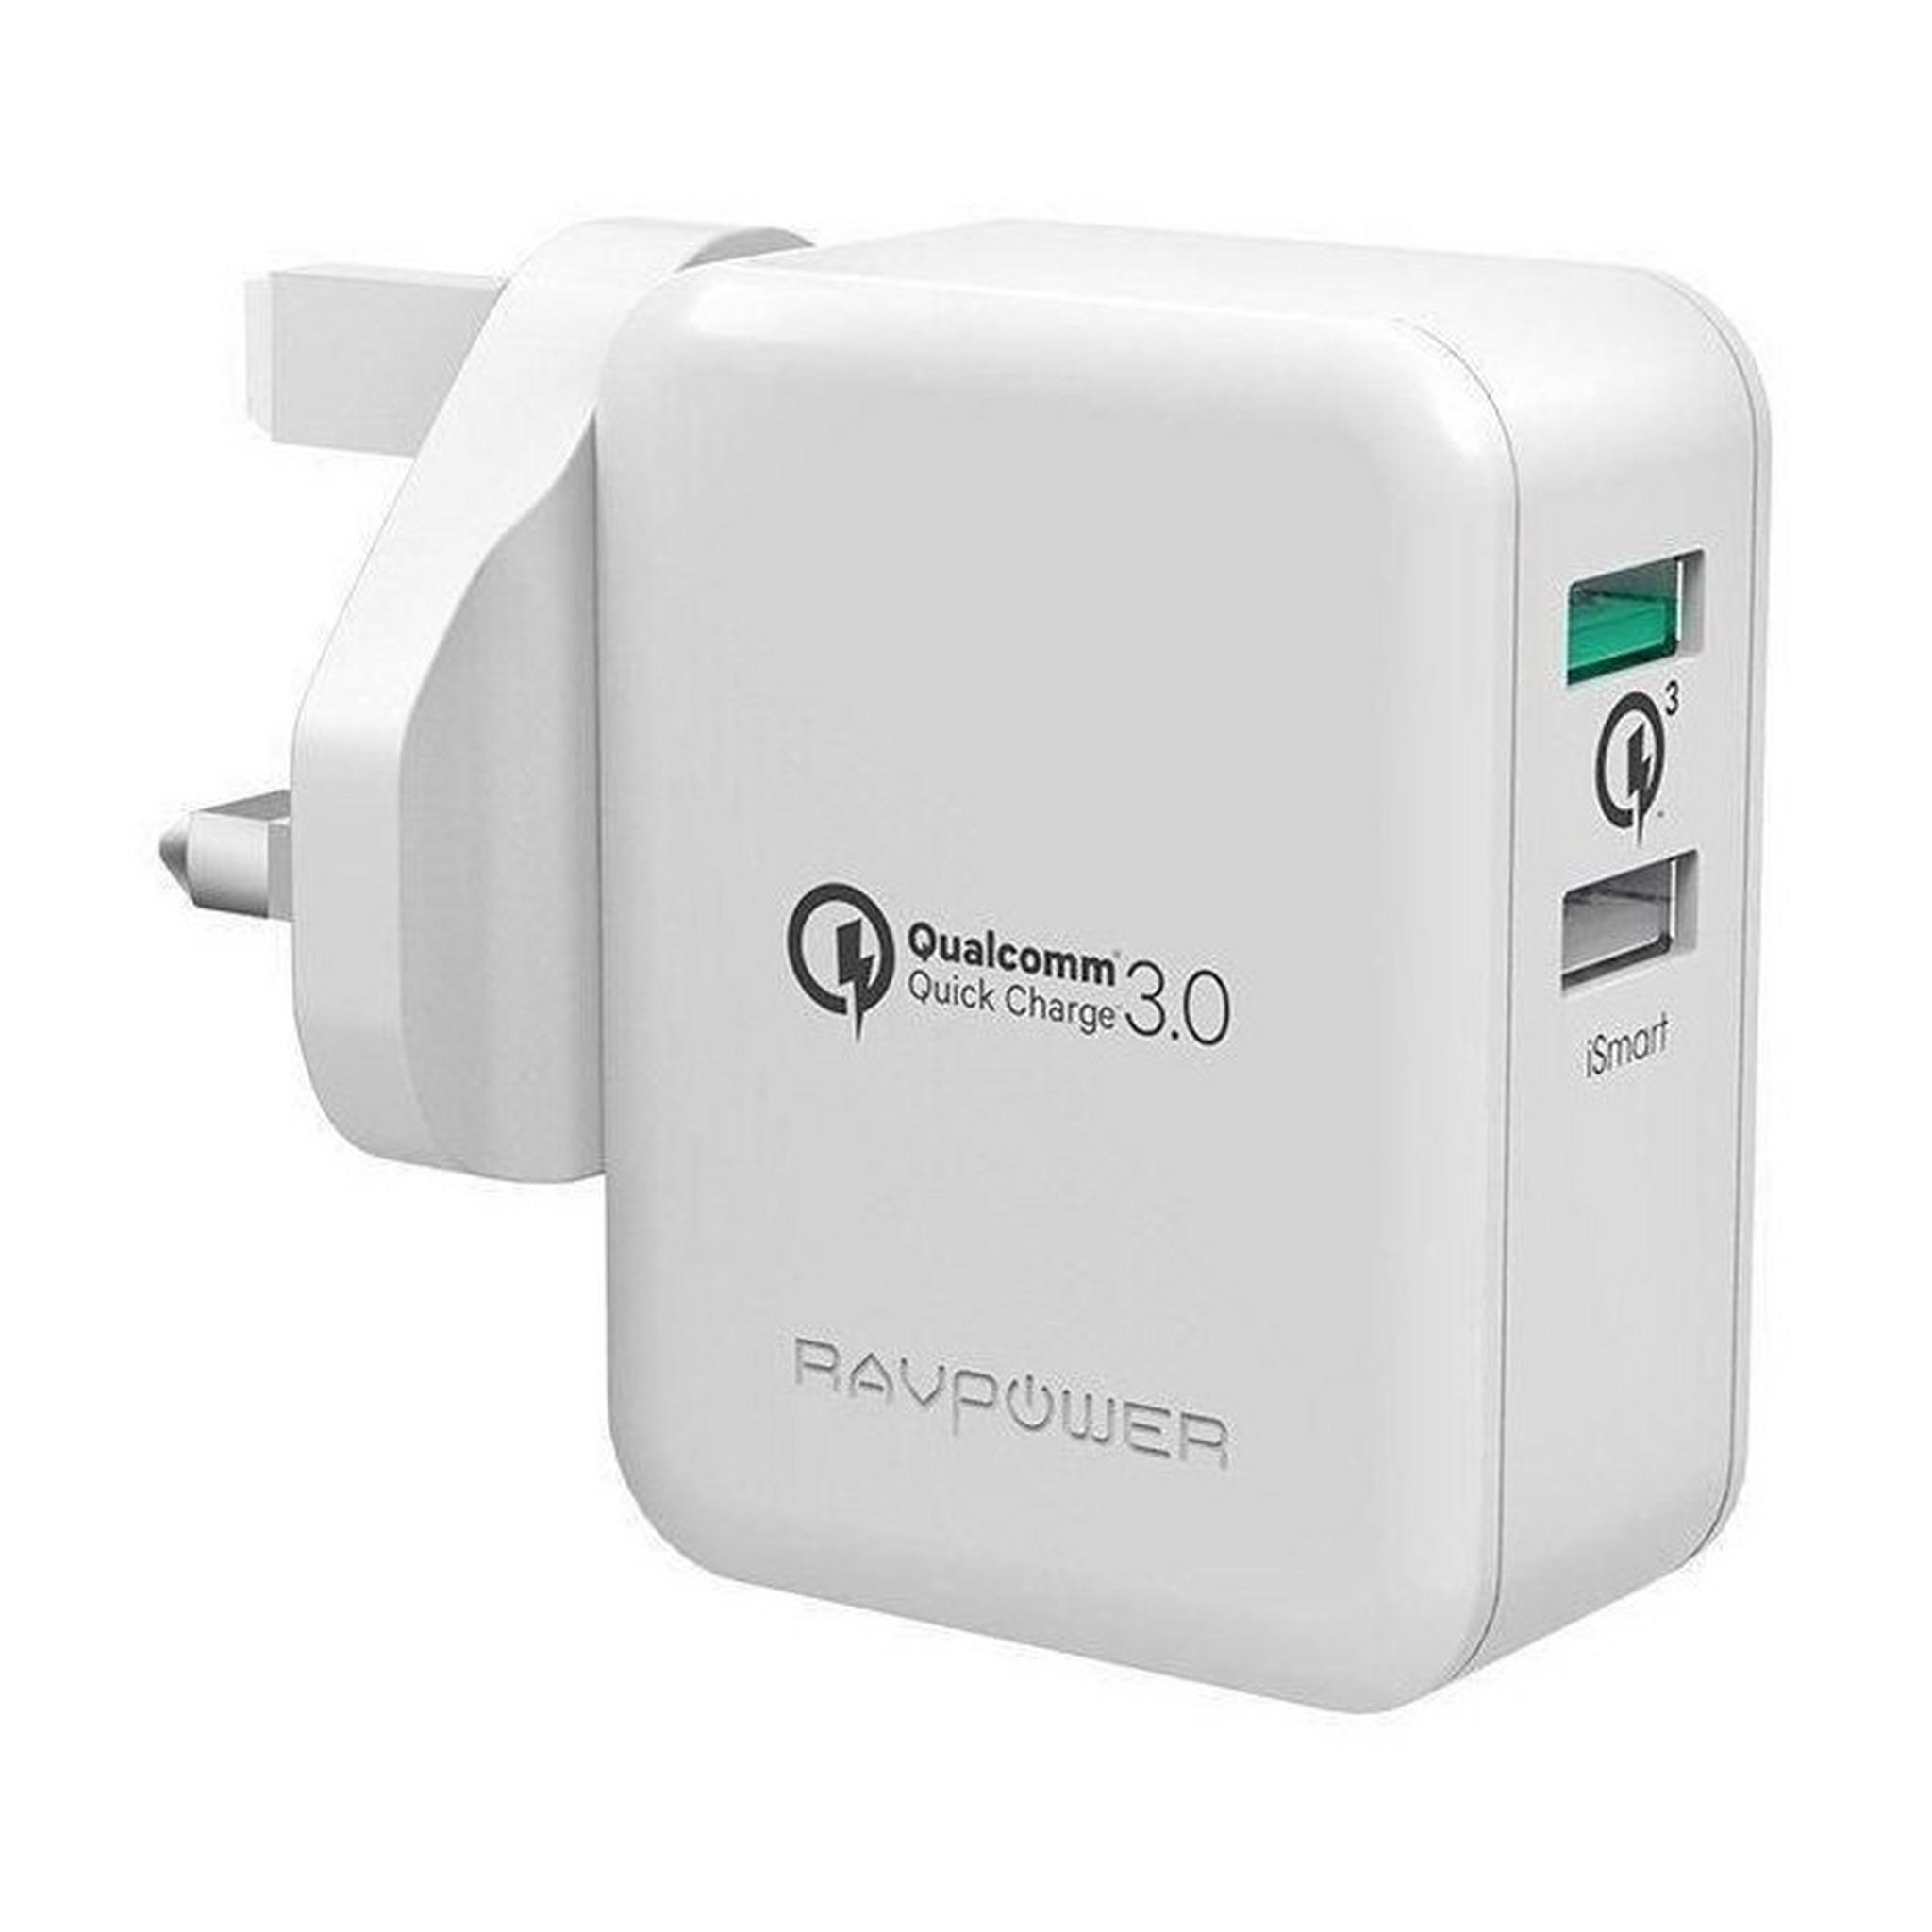 RAVPower 30W Dual USB Ports Wall Charger (RP-PC006) – White